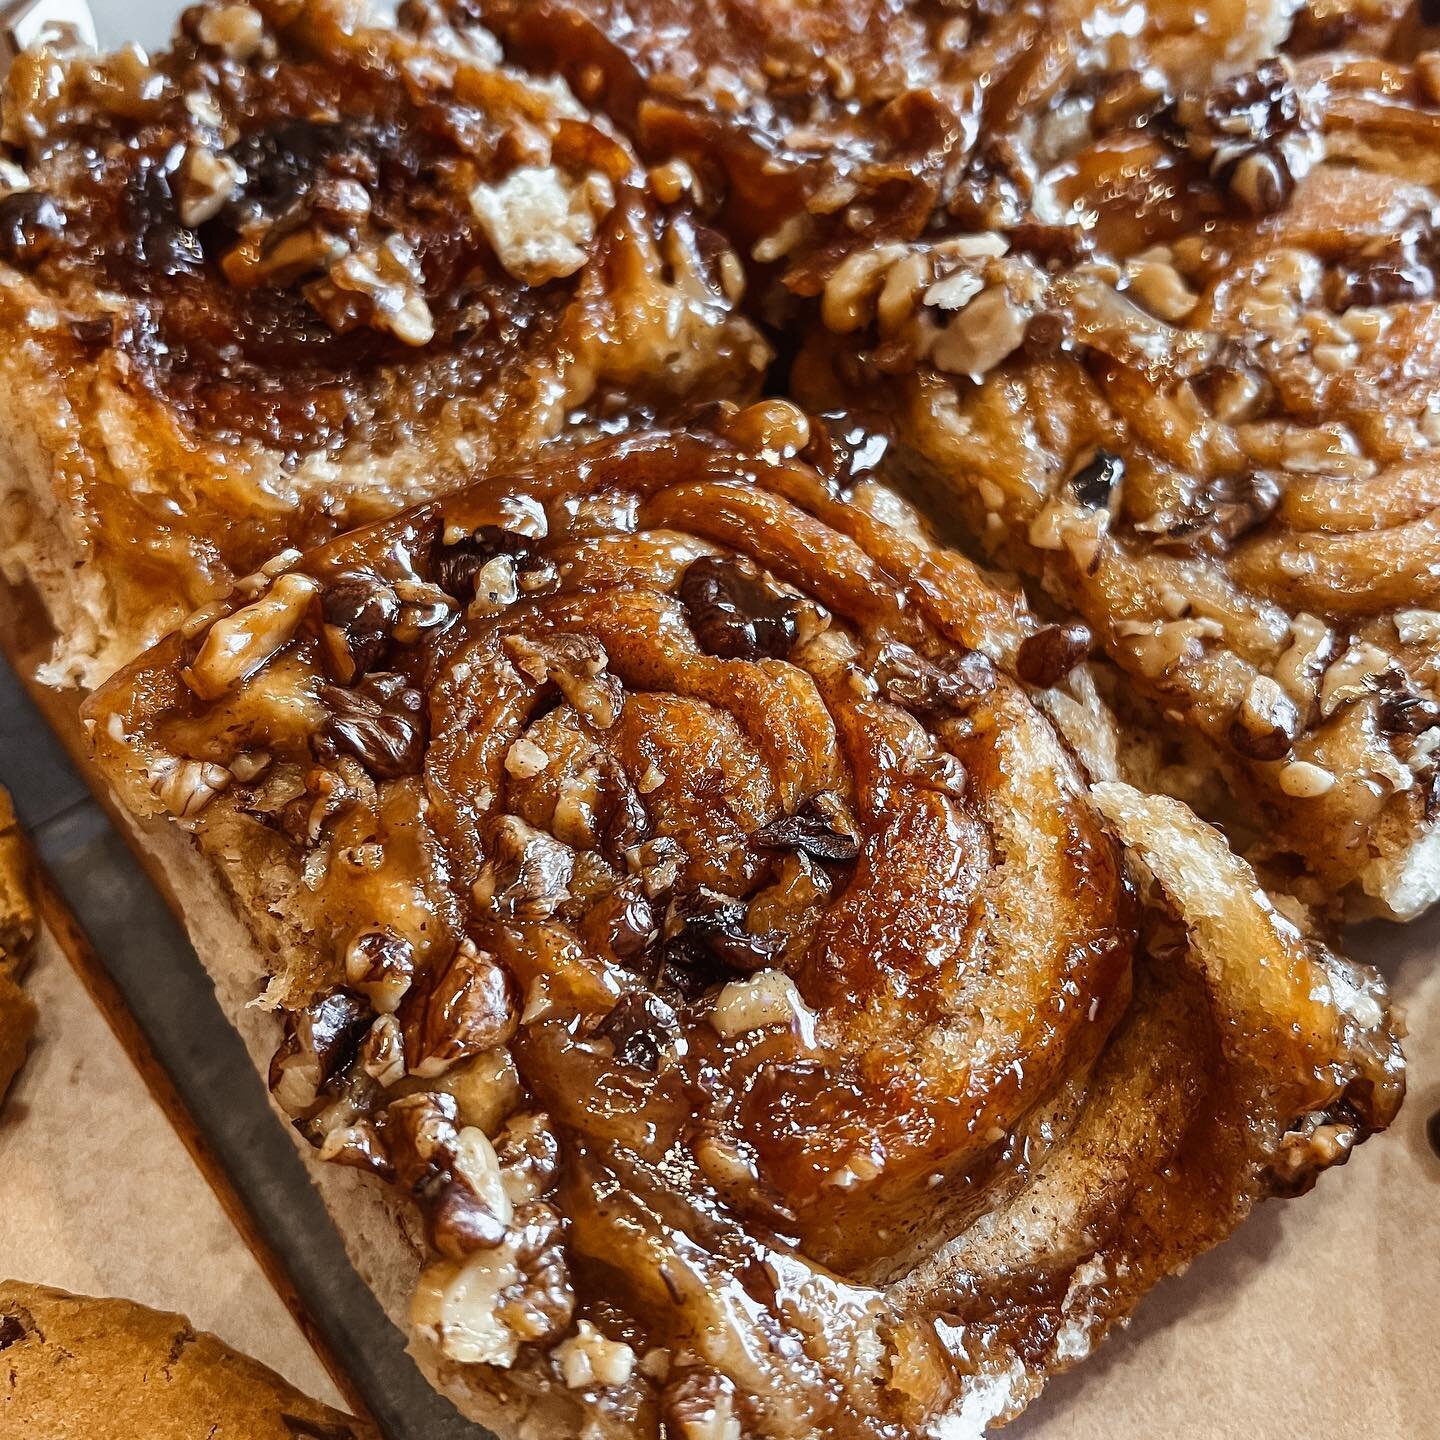 &bull; Sticky Buns &bull; we&rsquo;ve taken our signature soft and fluffy bun and drowned them in homemade caramel and chopped candied nuts 🧡 what&rsquo;s not to love?
&bull;
#stickybuns #nicebuns #homebaked #freshlybaked #bakehouse #artisanbakery #